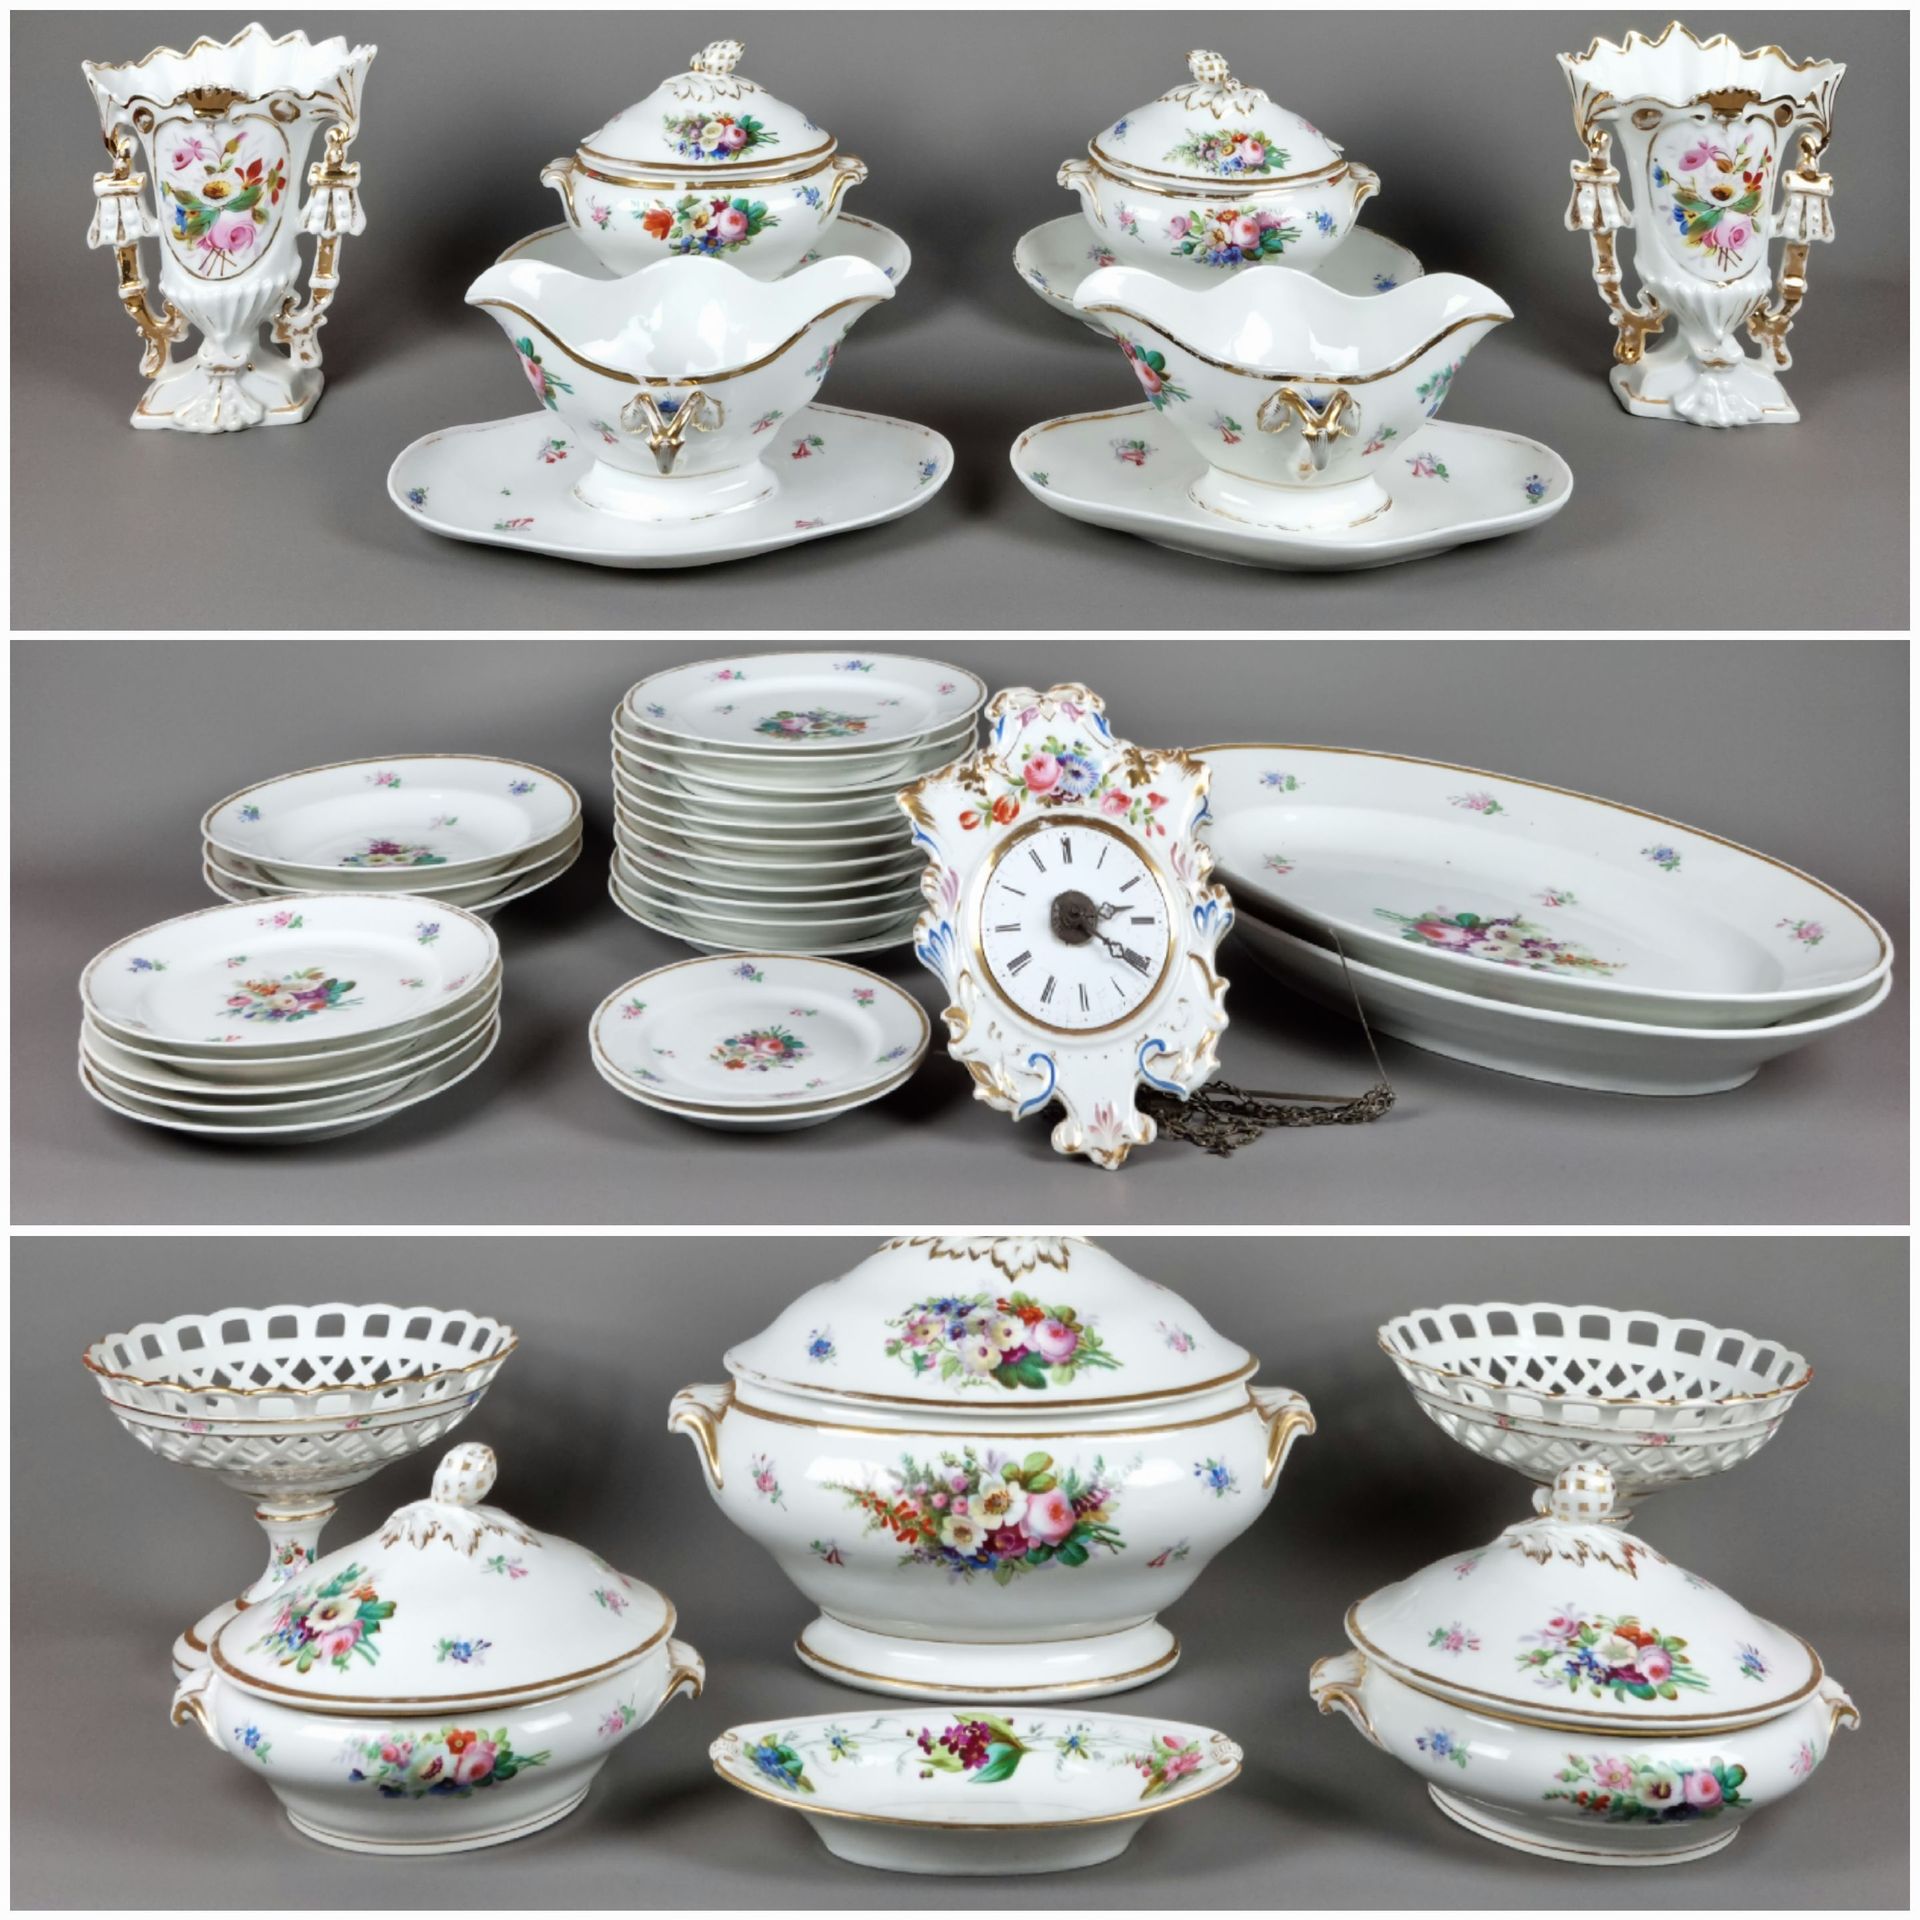 Null Service in old Brussels with floral decoration composed of 11 plates, 3 dee&hellip;